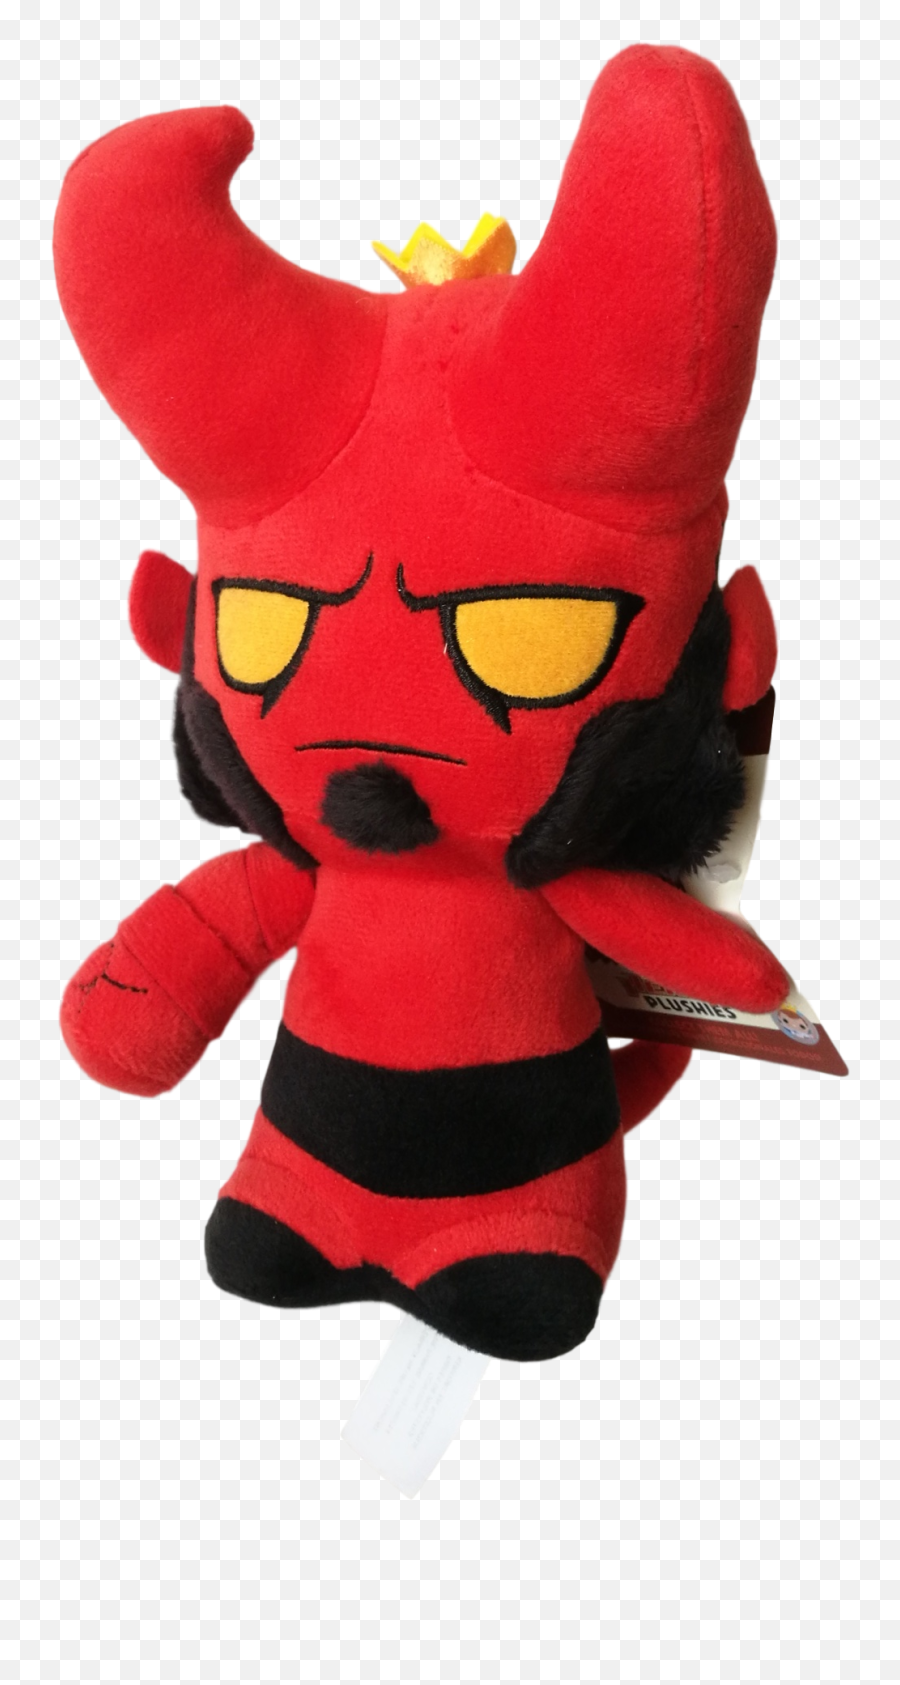 Full Size Png Image - Stuffed Toy,Hellboy Png